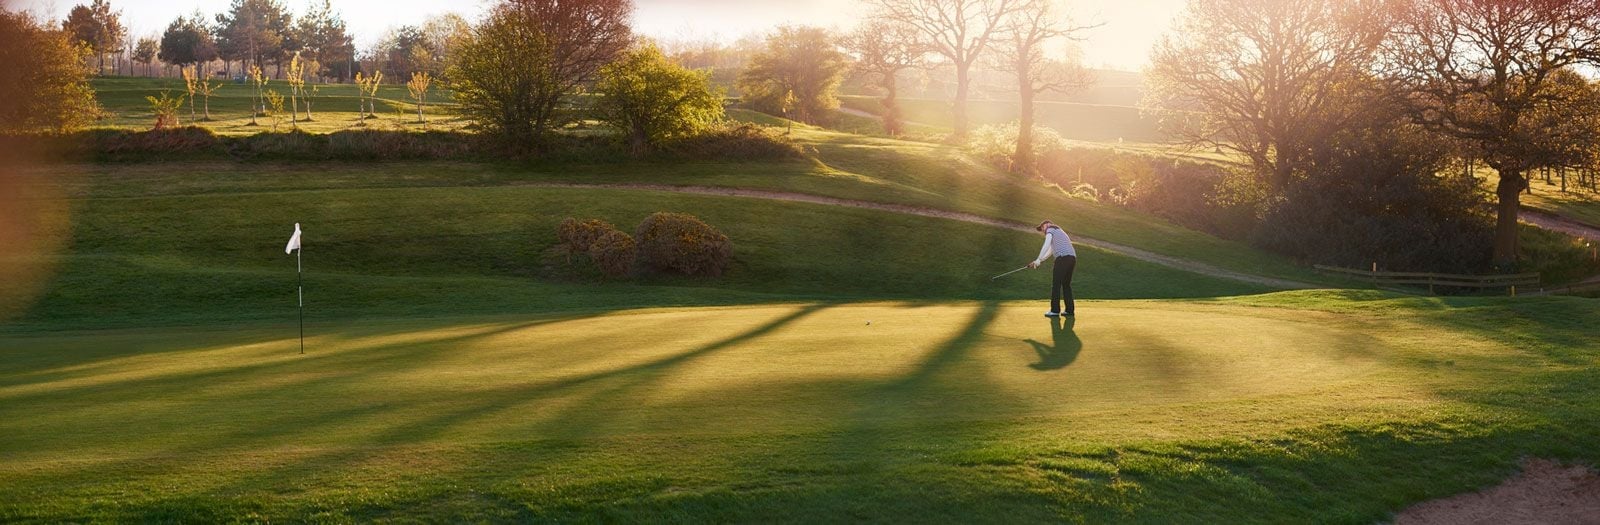 Panoramic shot of golfer playing on a sunlit course